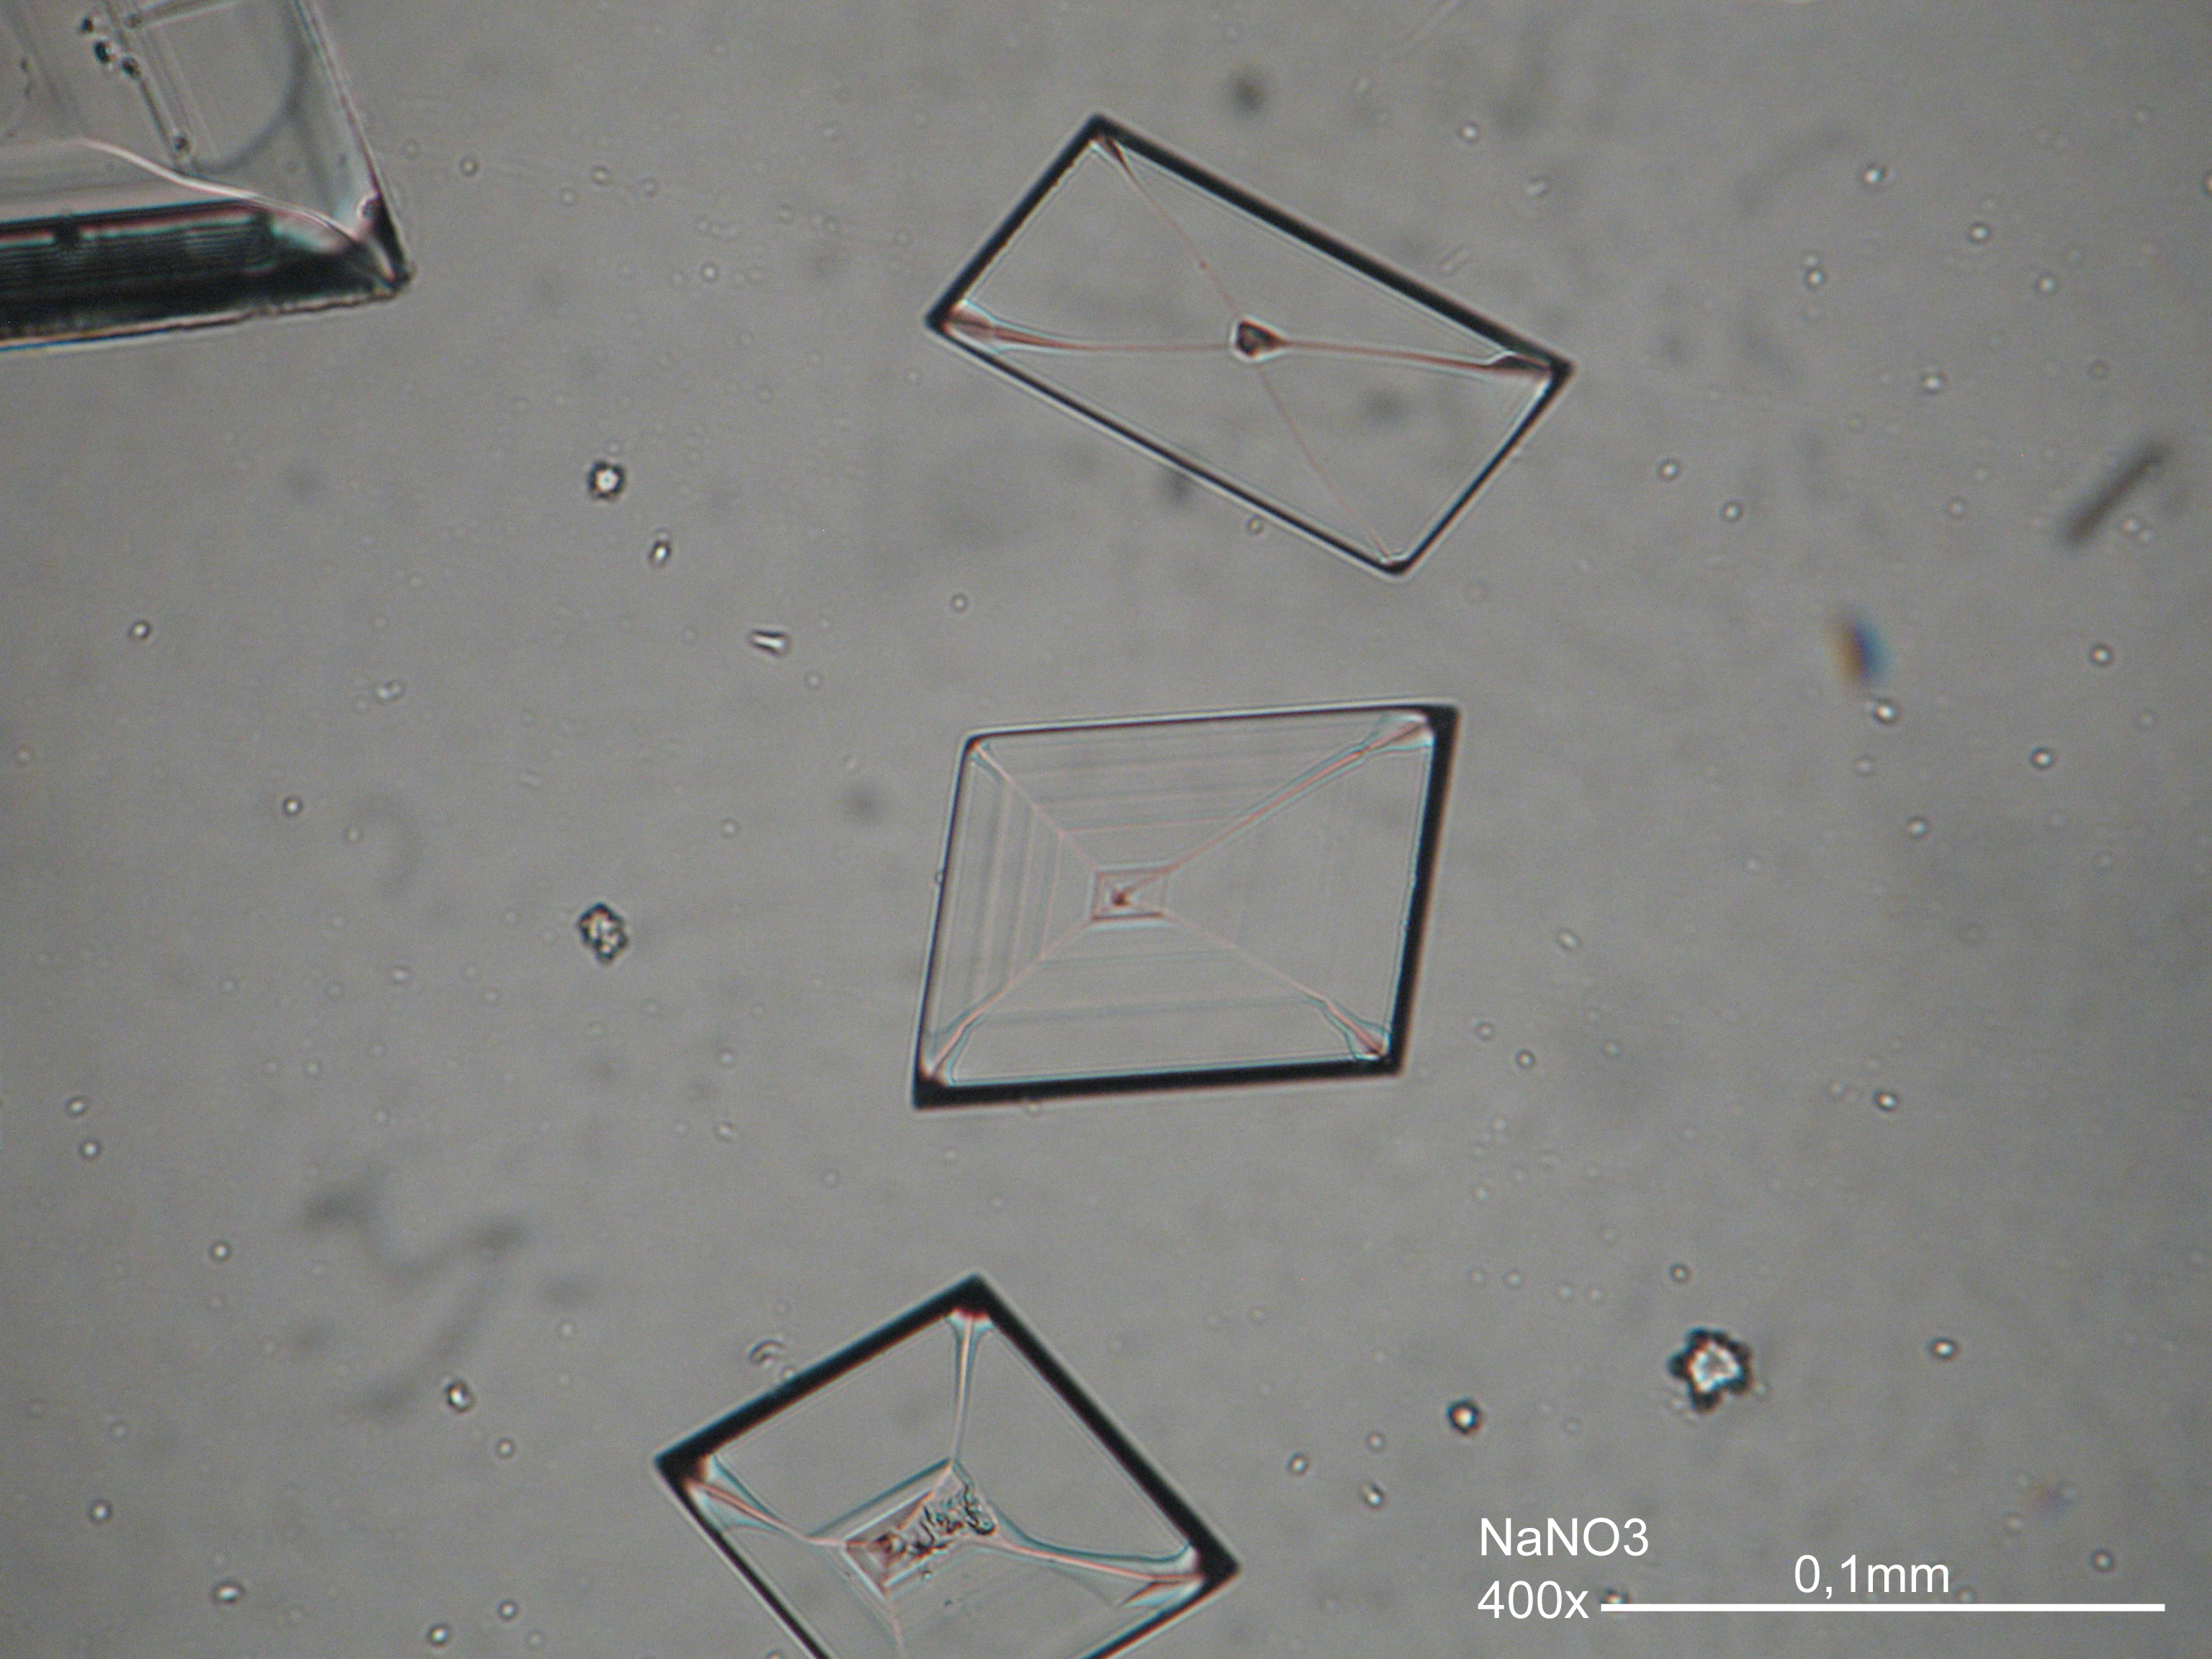 Nitratine, crystallized from aqueous solution on a glass slide